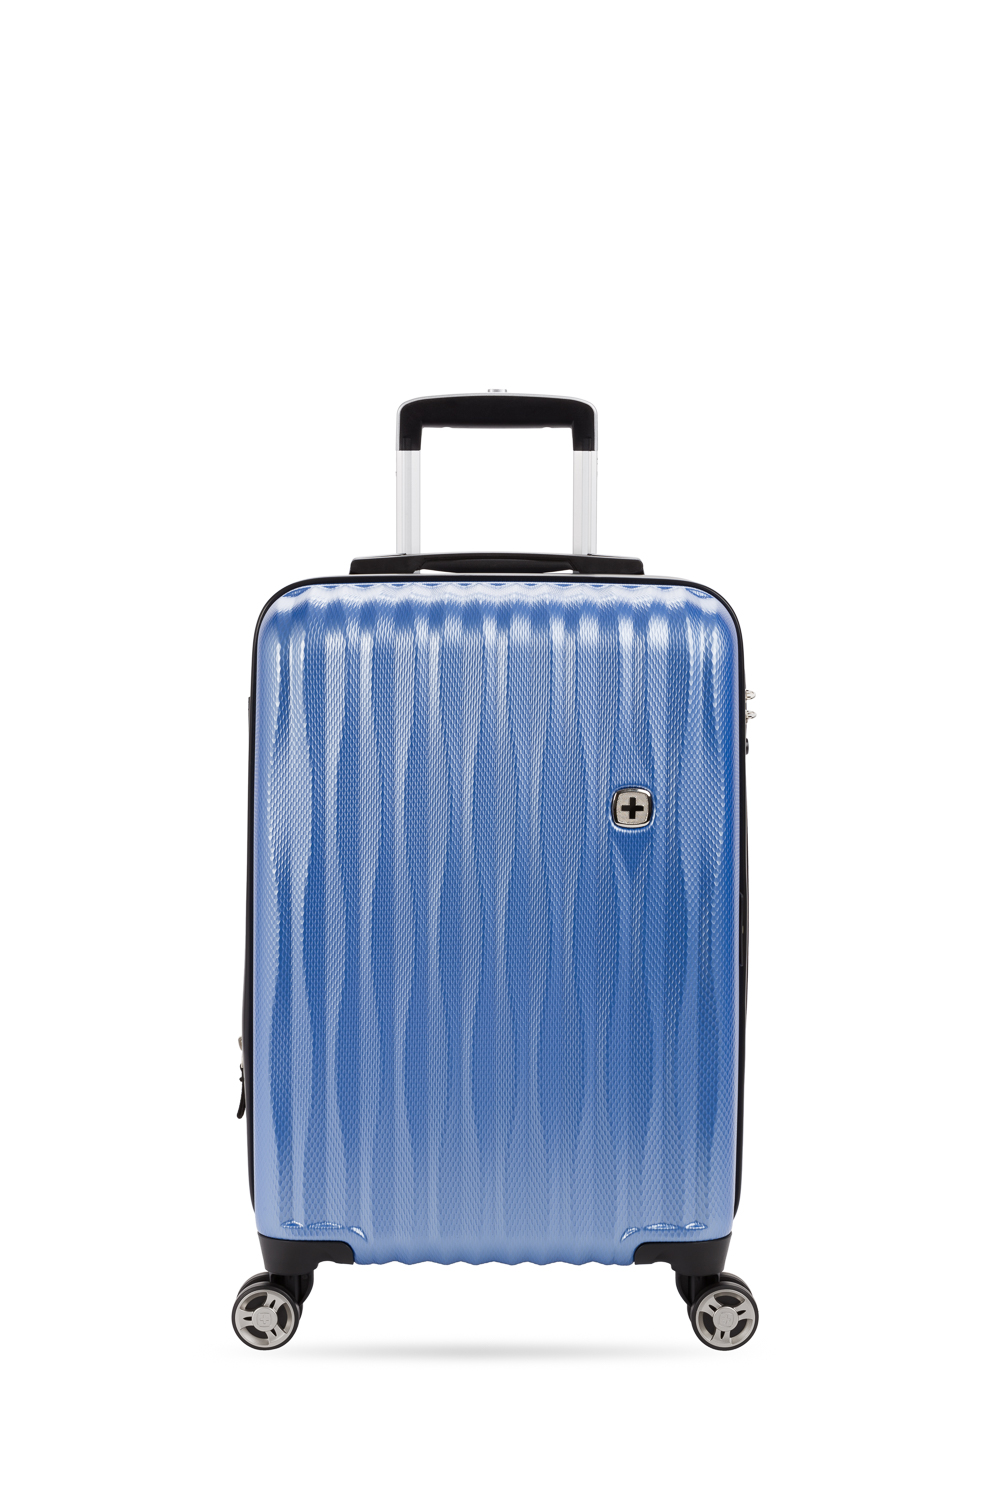 Swissgear 7272 19 USB Energie Expandable Carry On Hardside Spinner 